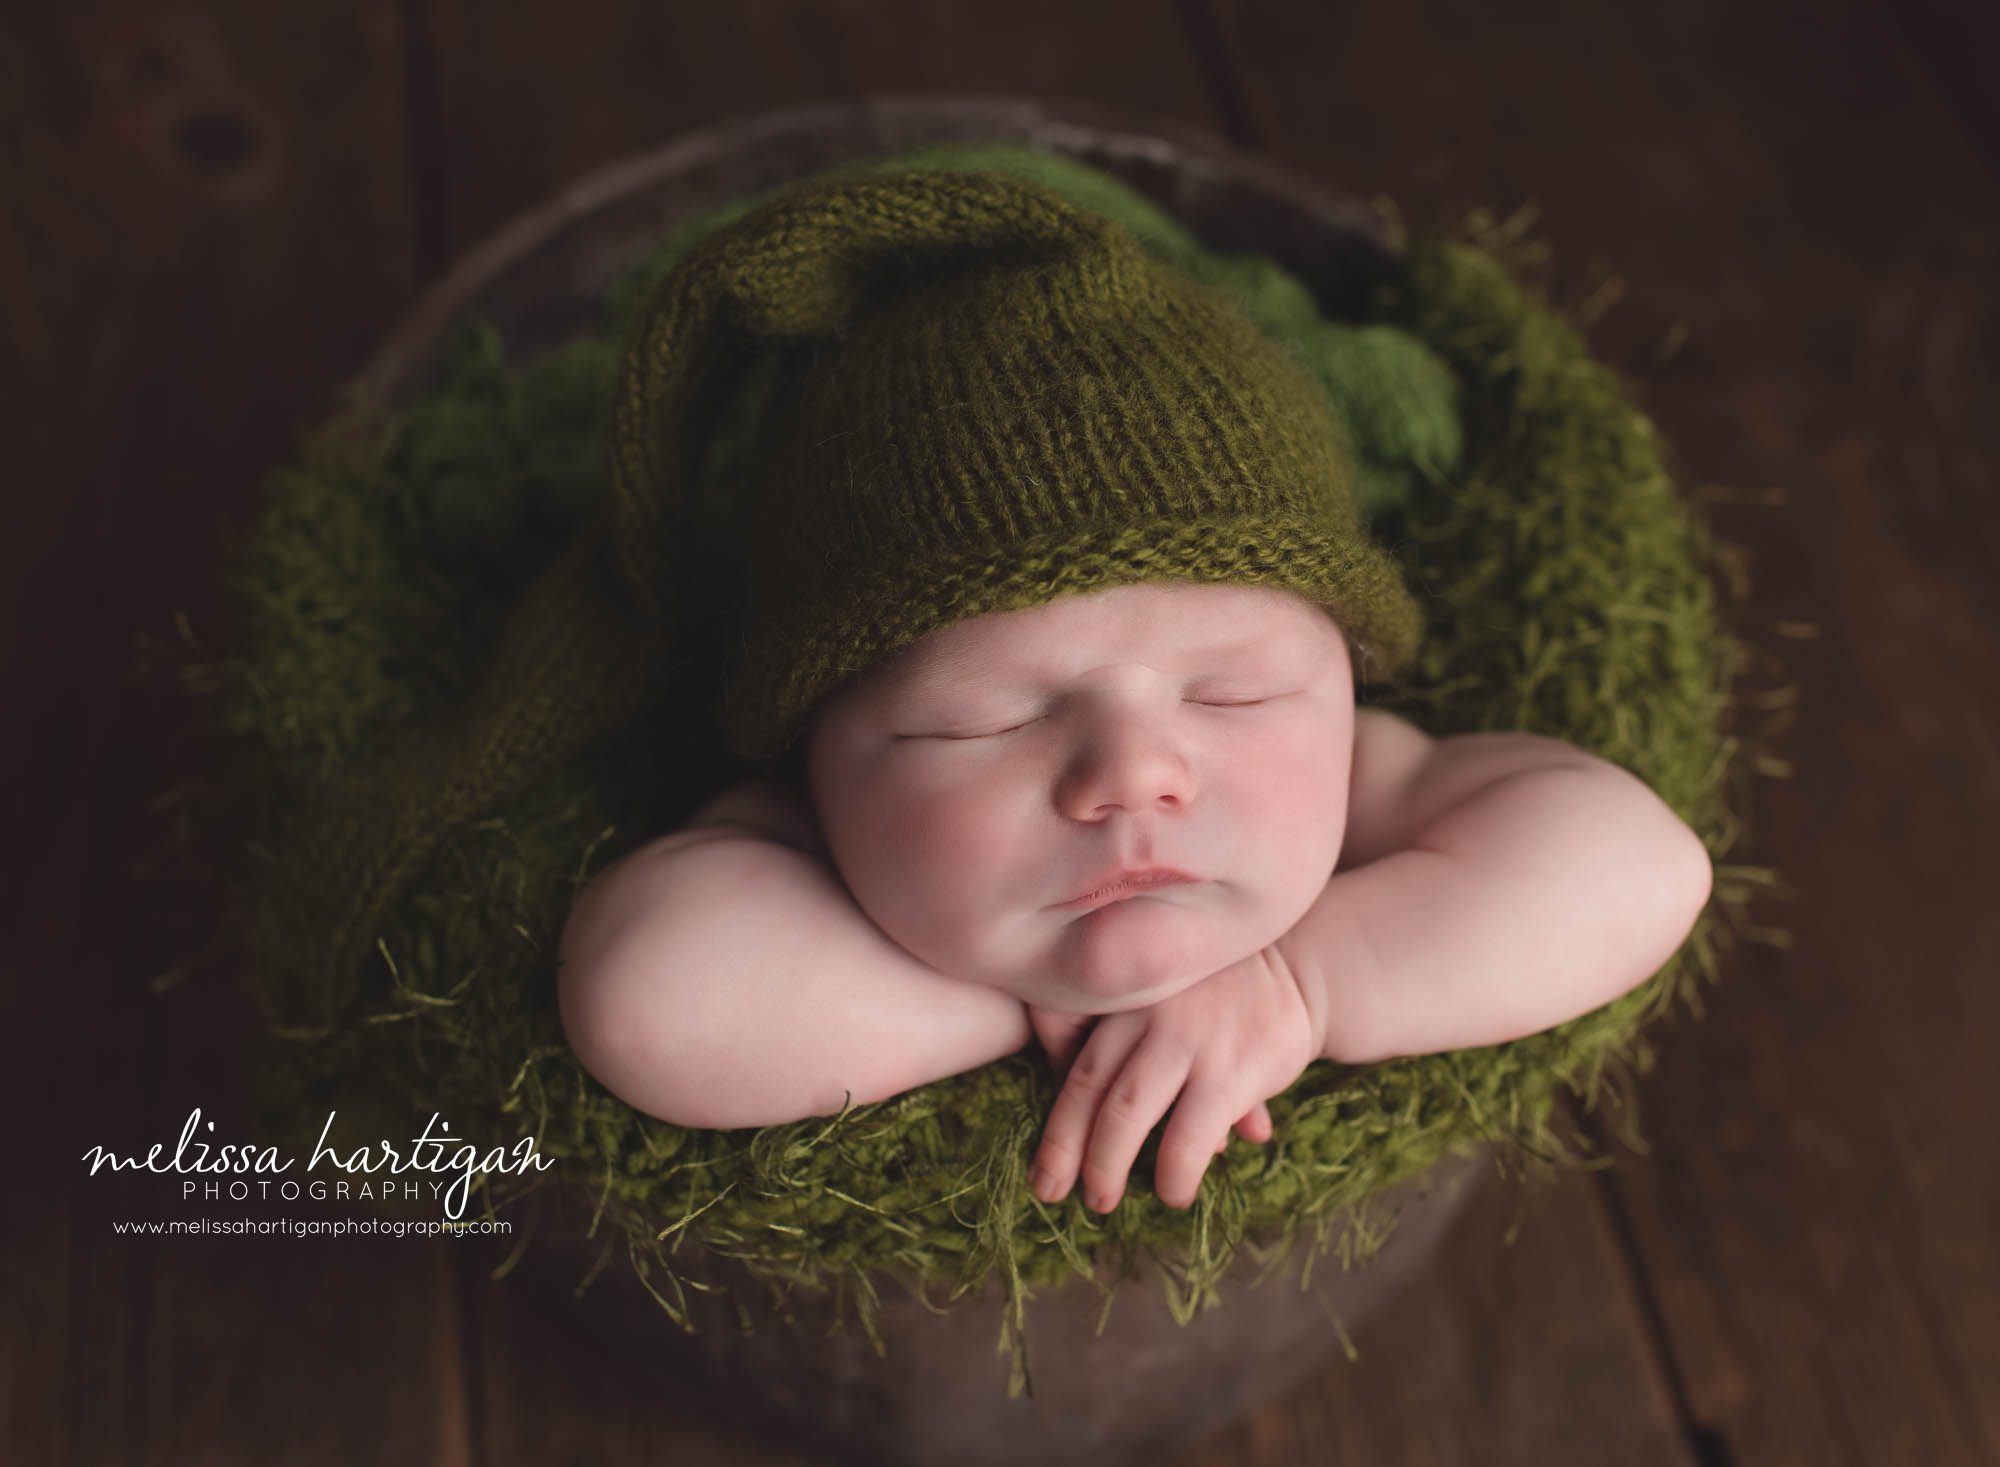 newborn posed in brown bucket with green moss layer